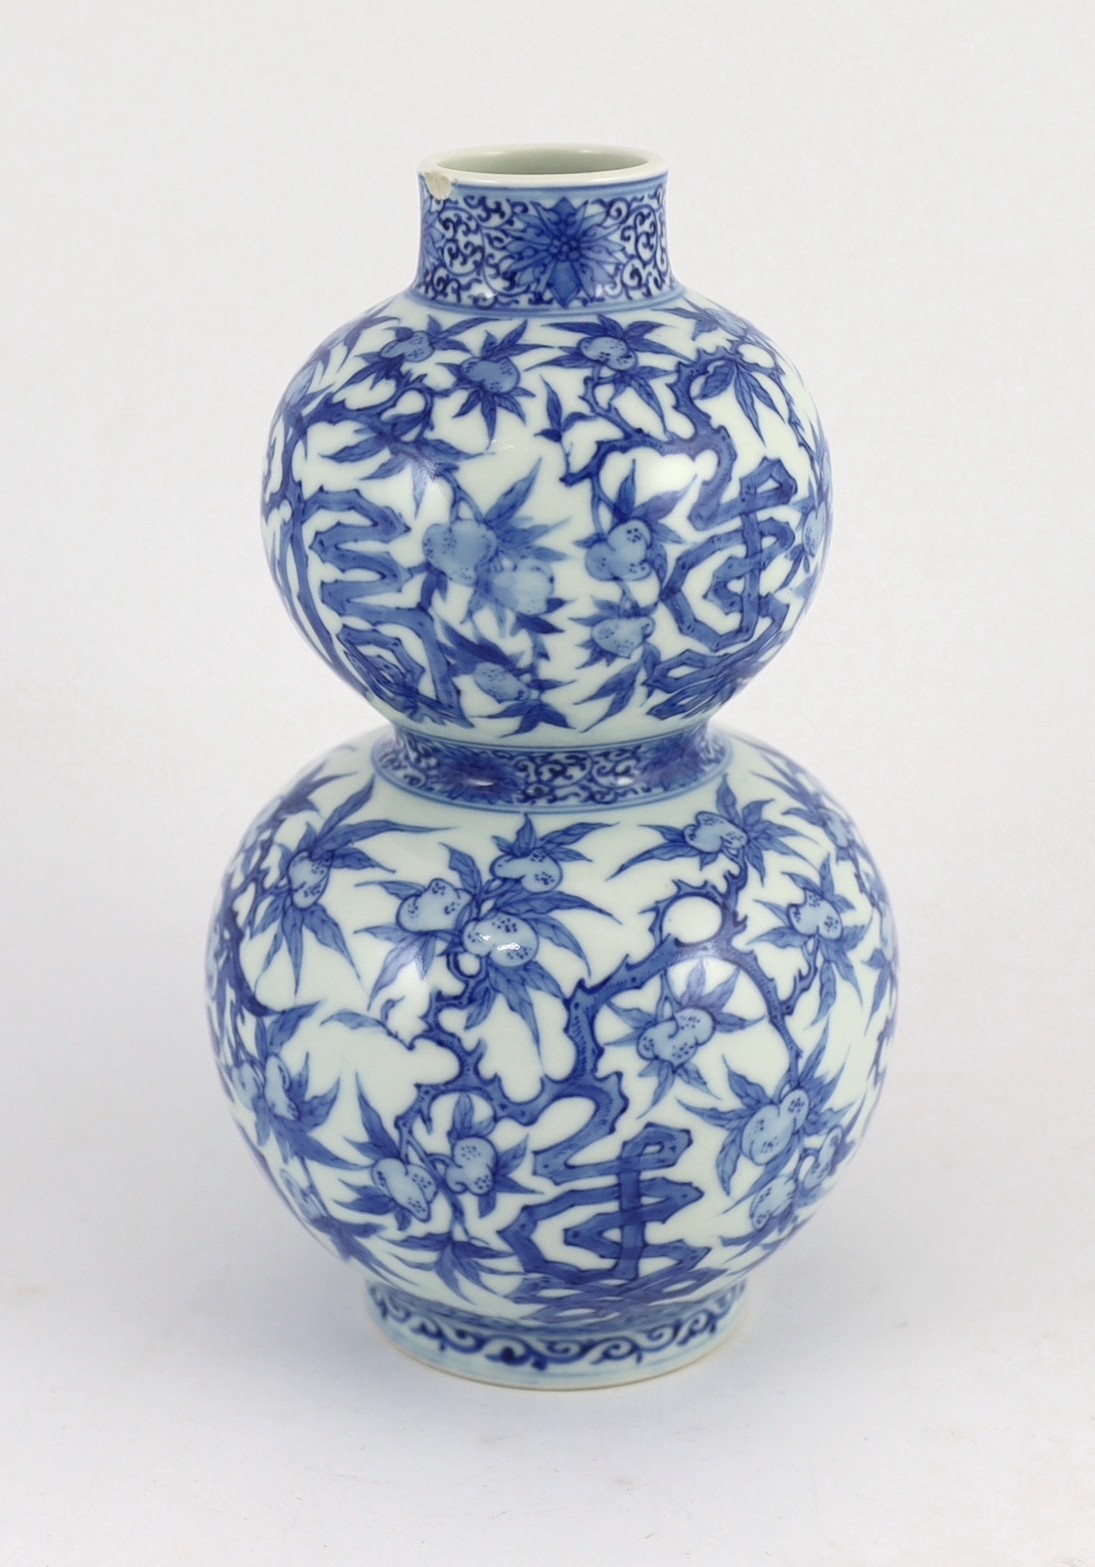 A Chinese blue and white 'fu lu shou' double gourd vase, Wanli mark probably late 19th century, 22cm high, splinter chip to rim and hairline crack to neck